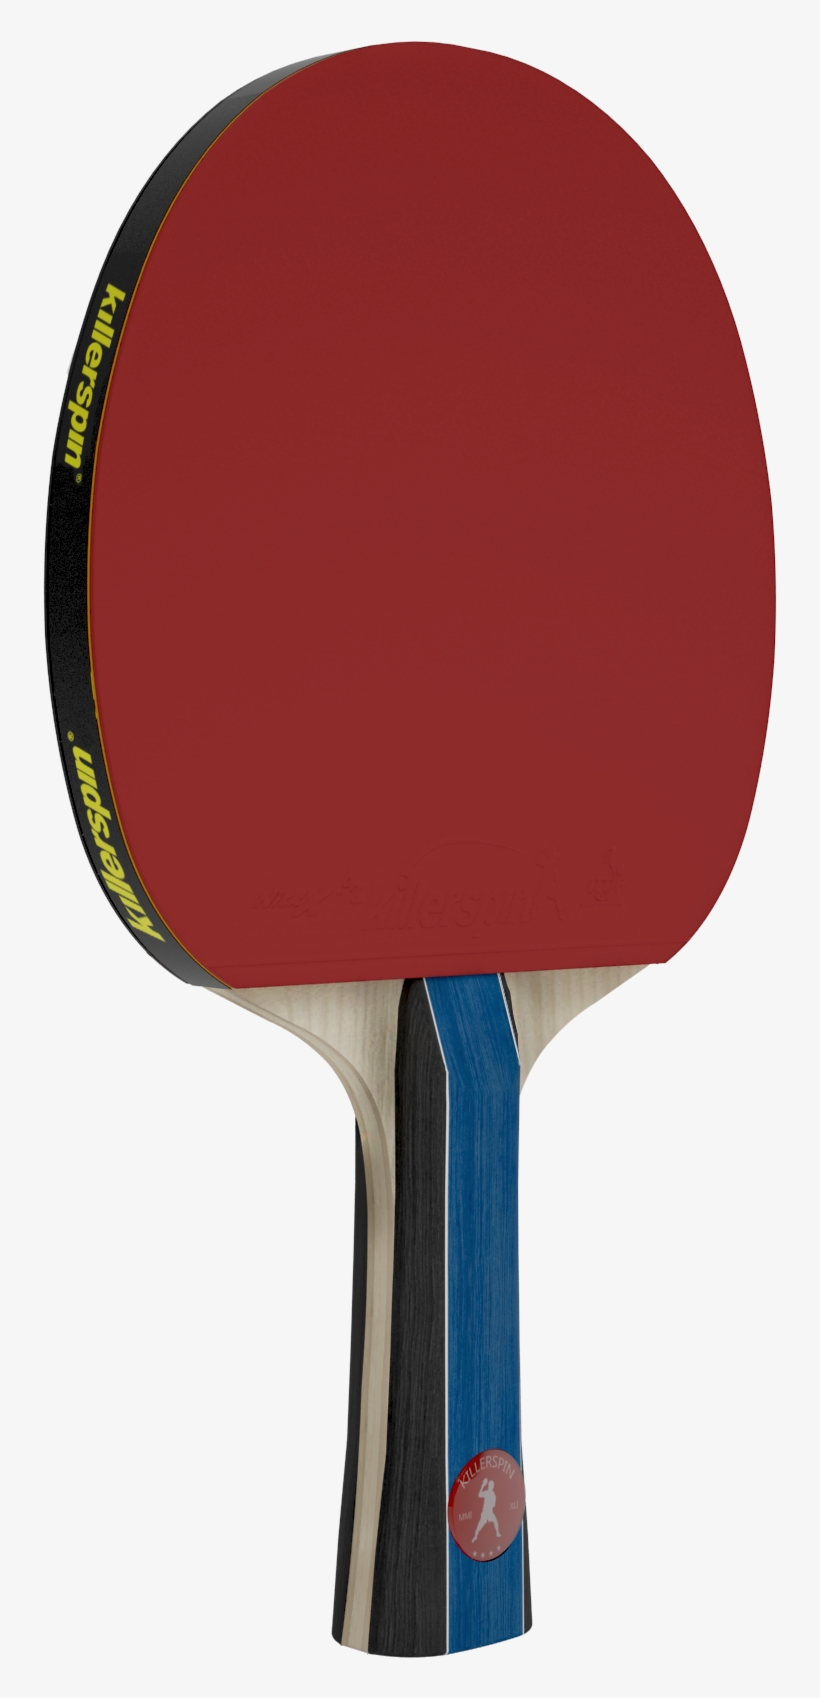 Killerspin Kido 5a Premium Flared Handle, Ittf Approved, - Ping Pong, transparent png #7788018